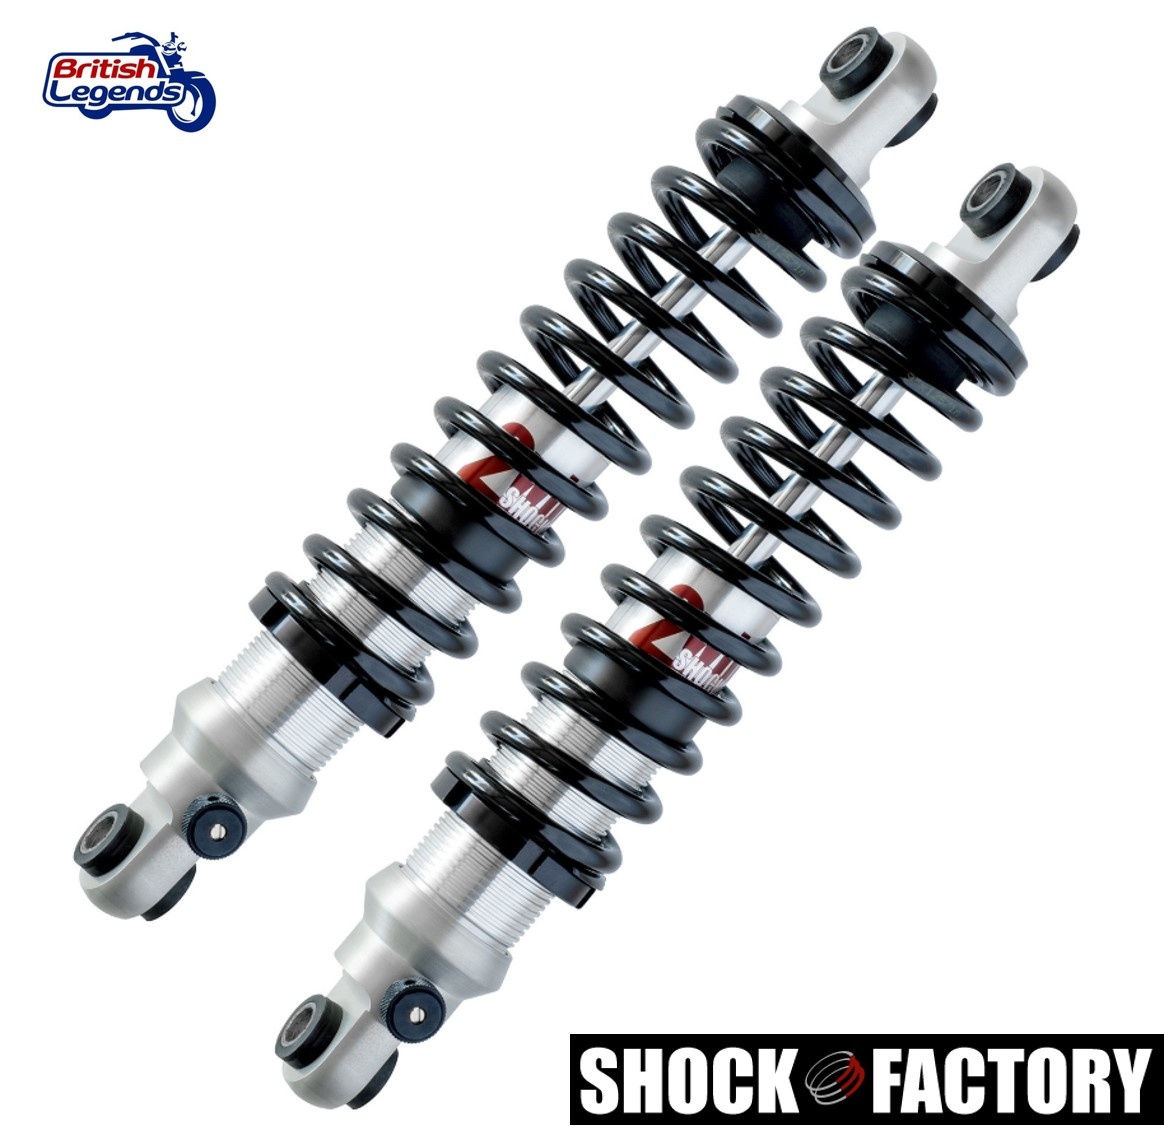 Shock Absorbers 2win By Shock Factory For Triumph Street Scrambler Triumph Parts